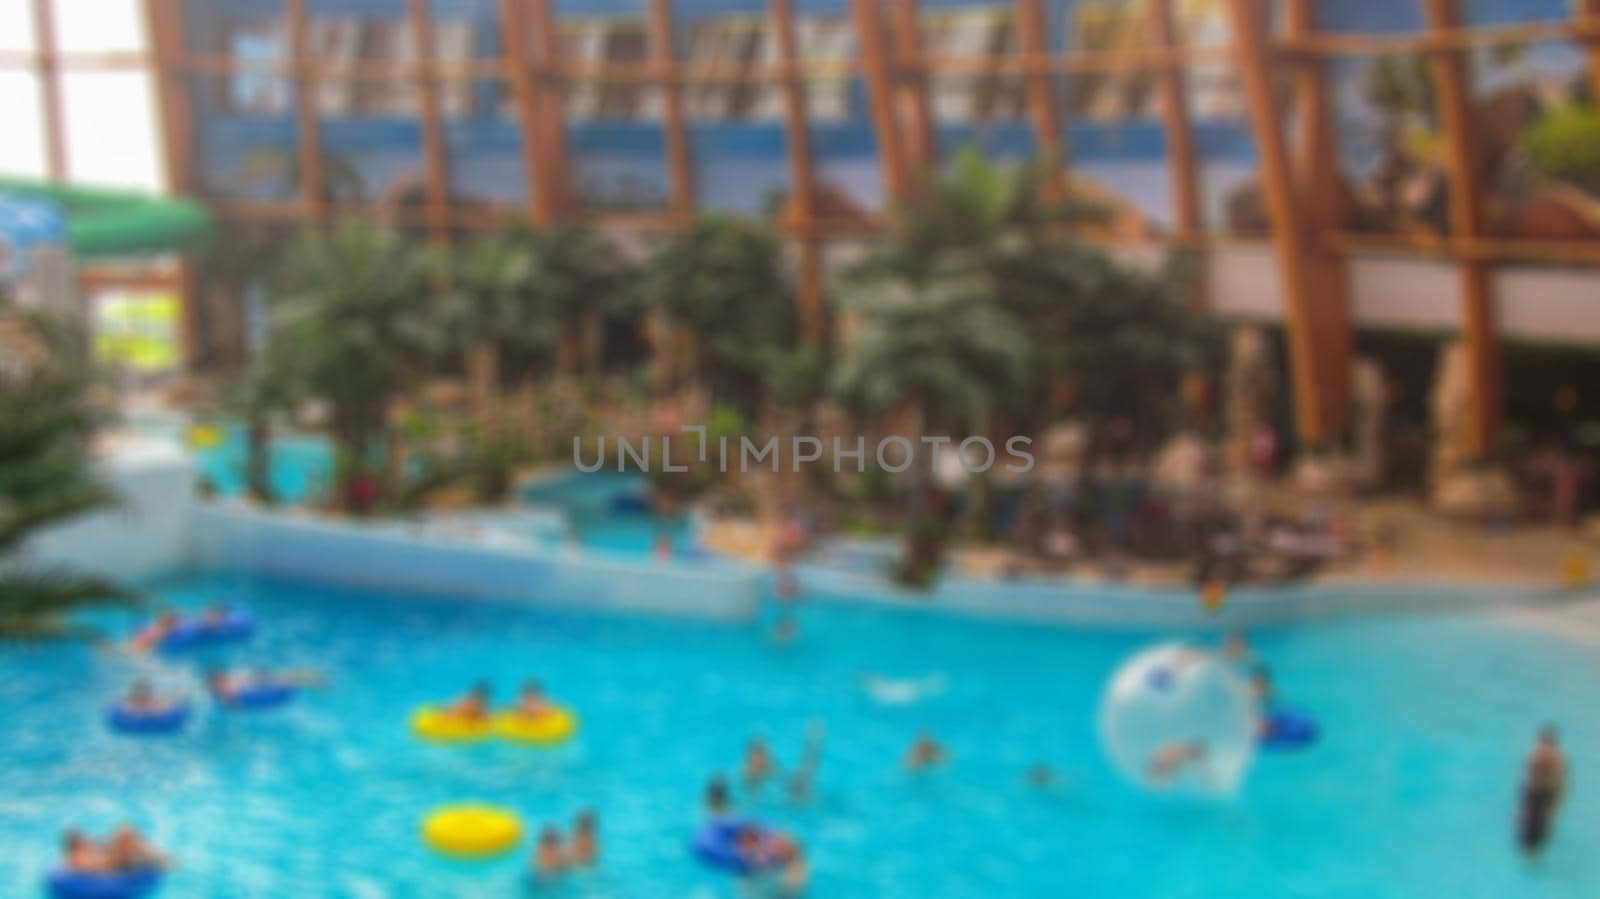 Blur with bokeh elements in a creative story on the theme of recreation in a water Park. Stock photo for backgrounds.